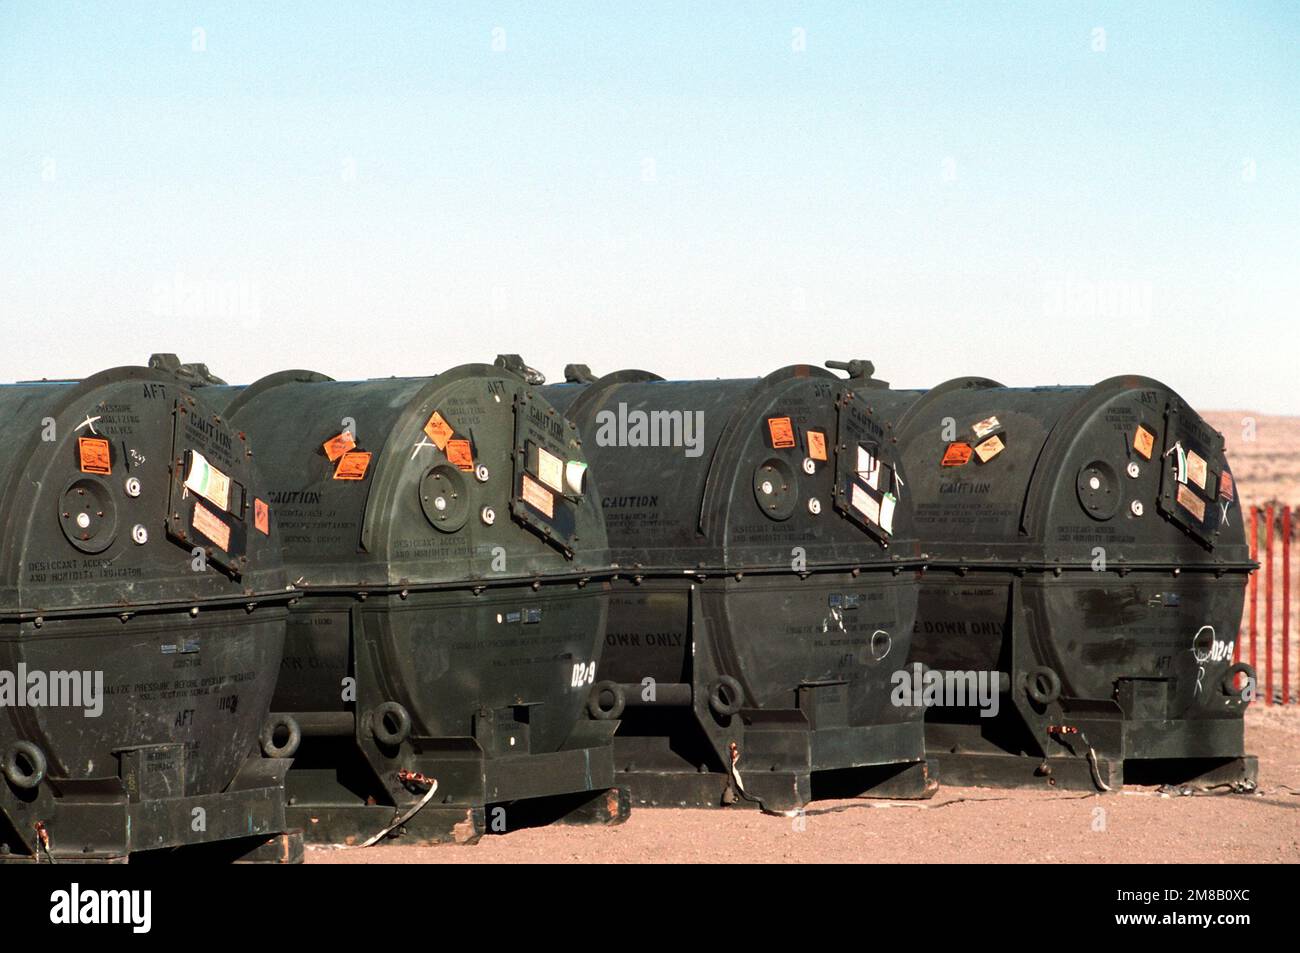 Containers used for shipping stages of the Army's Pershing II missile sit in a row. Several missiles will be destroyed in the presence of inspectors from the Soviet Union in accordance with the Intermediate-Range Nuclear Forces (INF) Treaty. Base: Pueblo Army Depot Activity State: Colorado (CO) Country: United States Of America (USA) Stock Photo